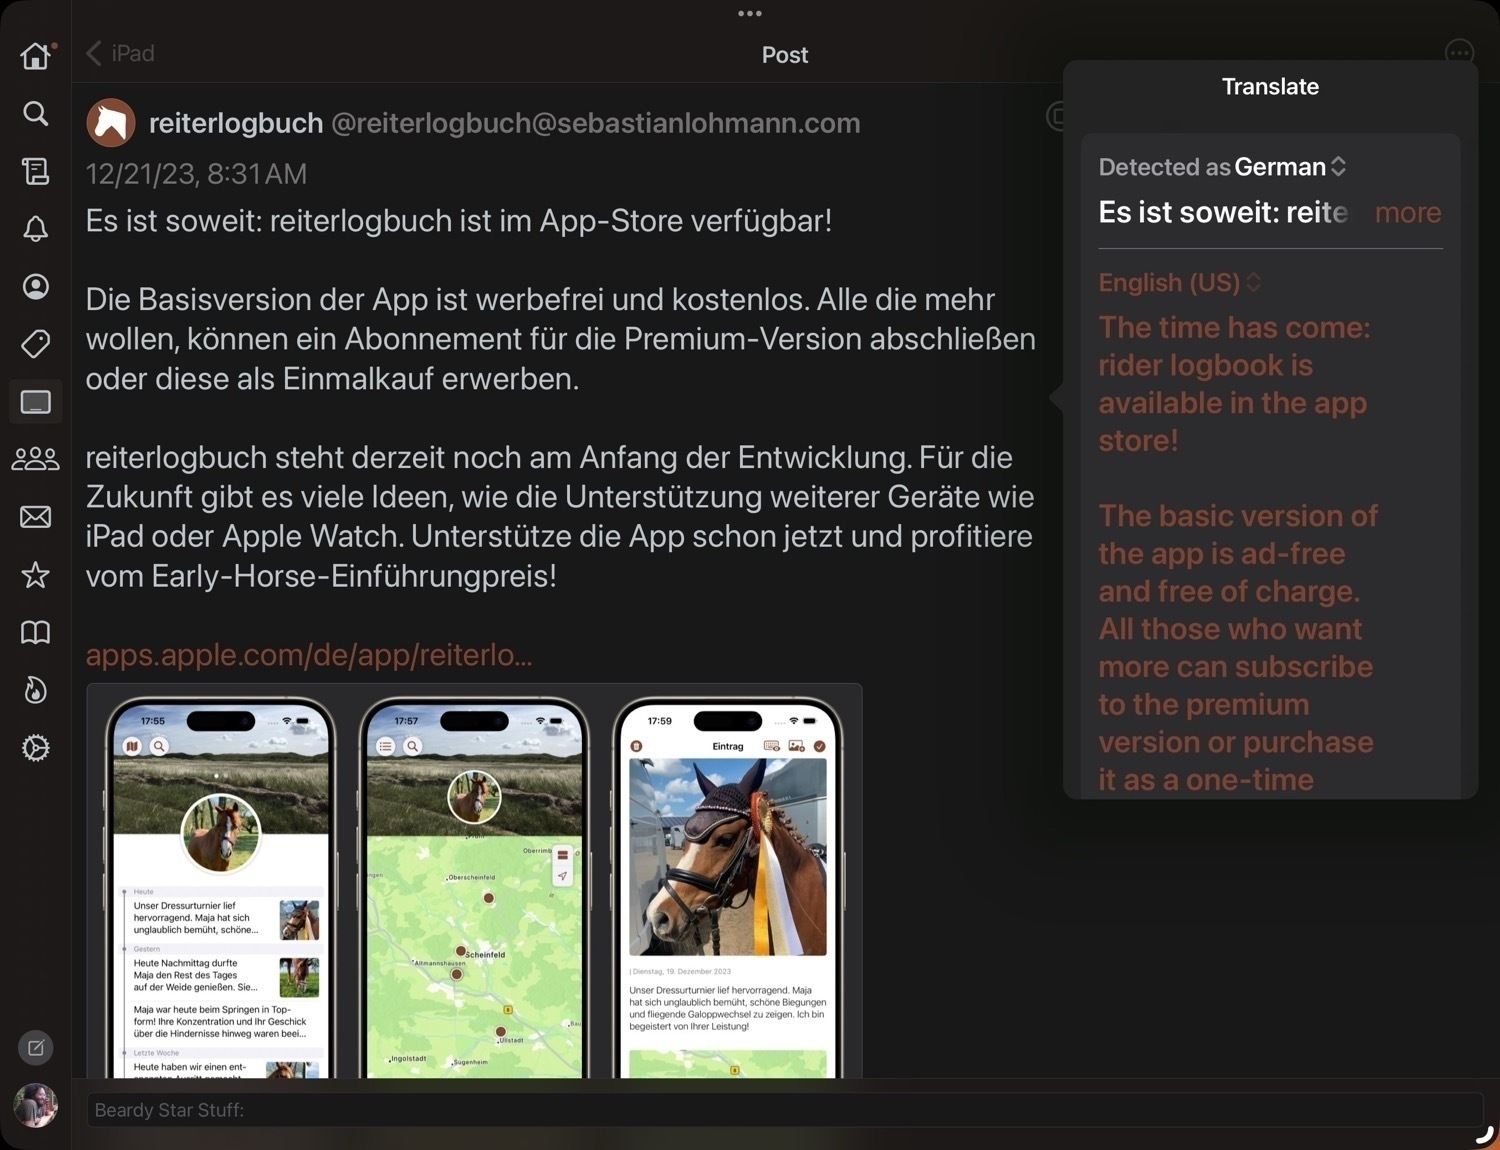 A screenshot of the app mona shows translated text